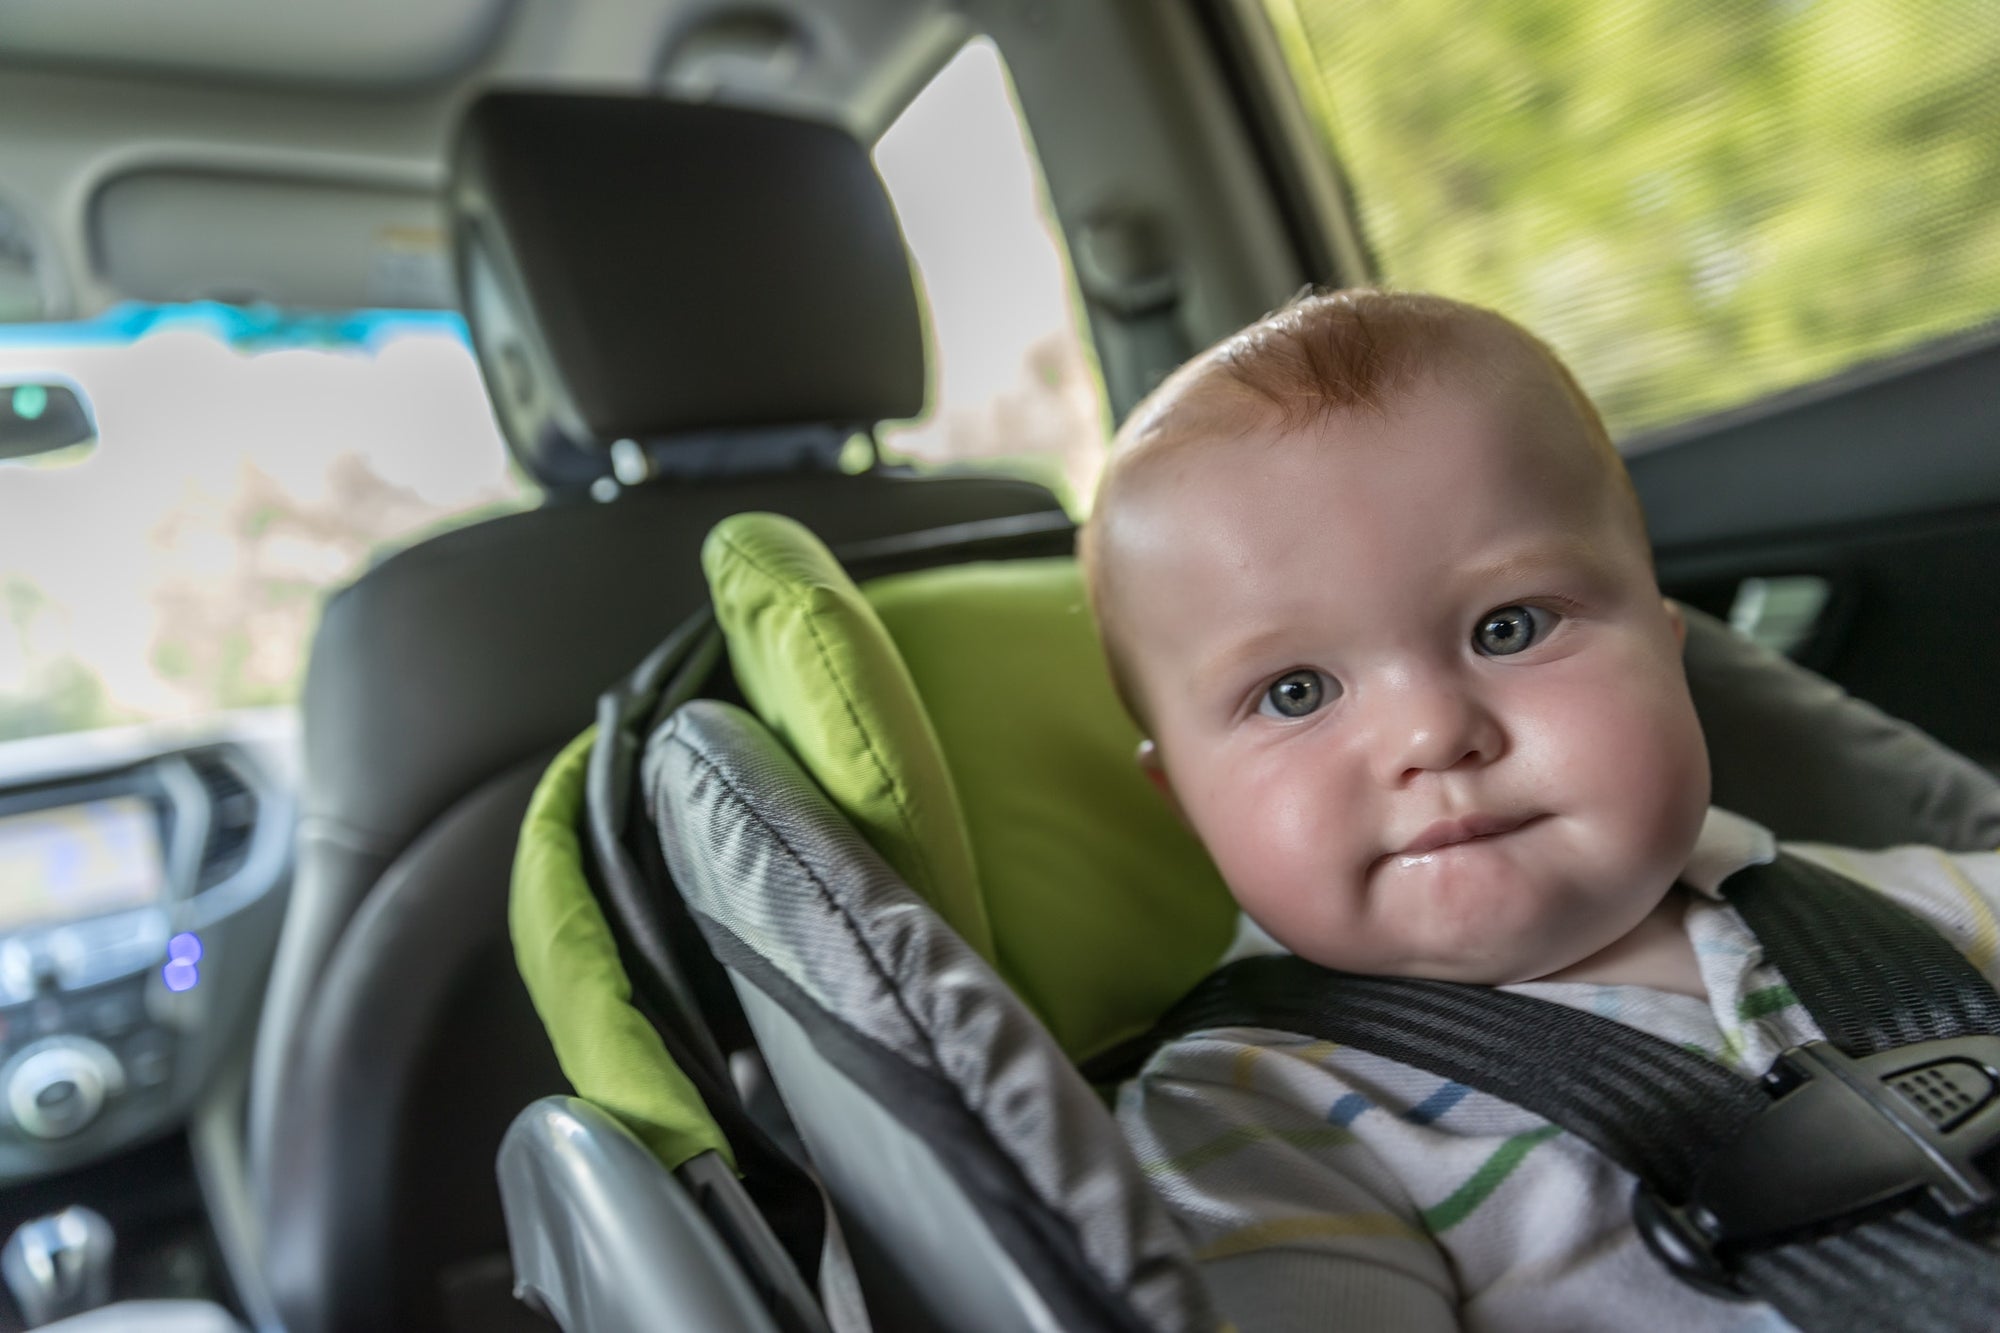 chubby baby in a child safety car seat